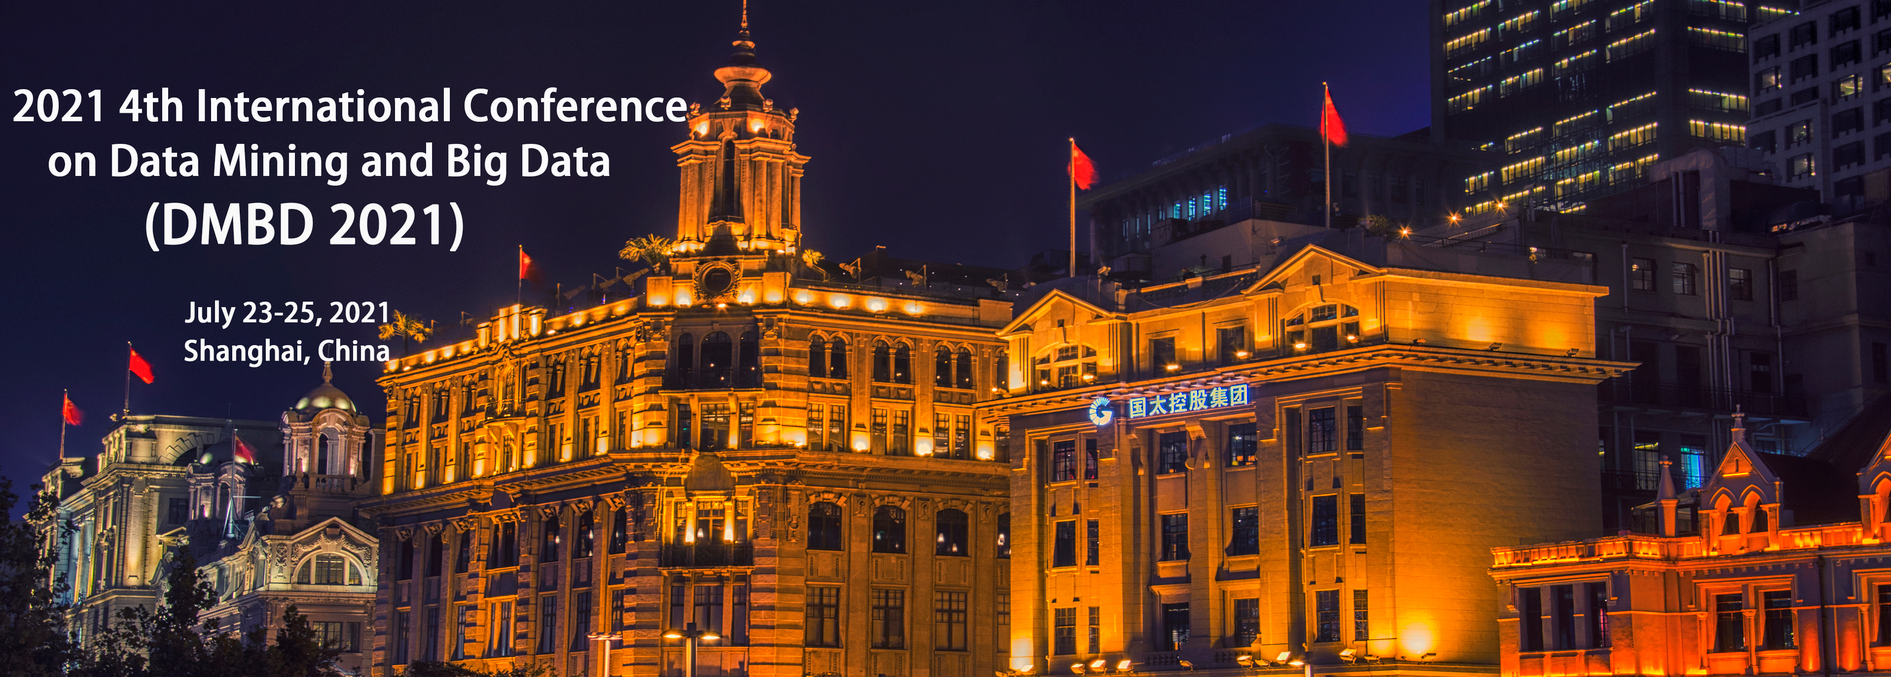 2021 4th International Conference on Data Mining and Big Data (DMBD 2021), Shanghai, China